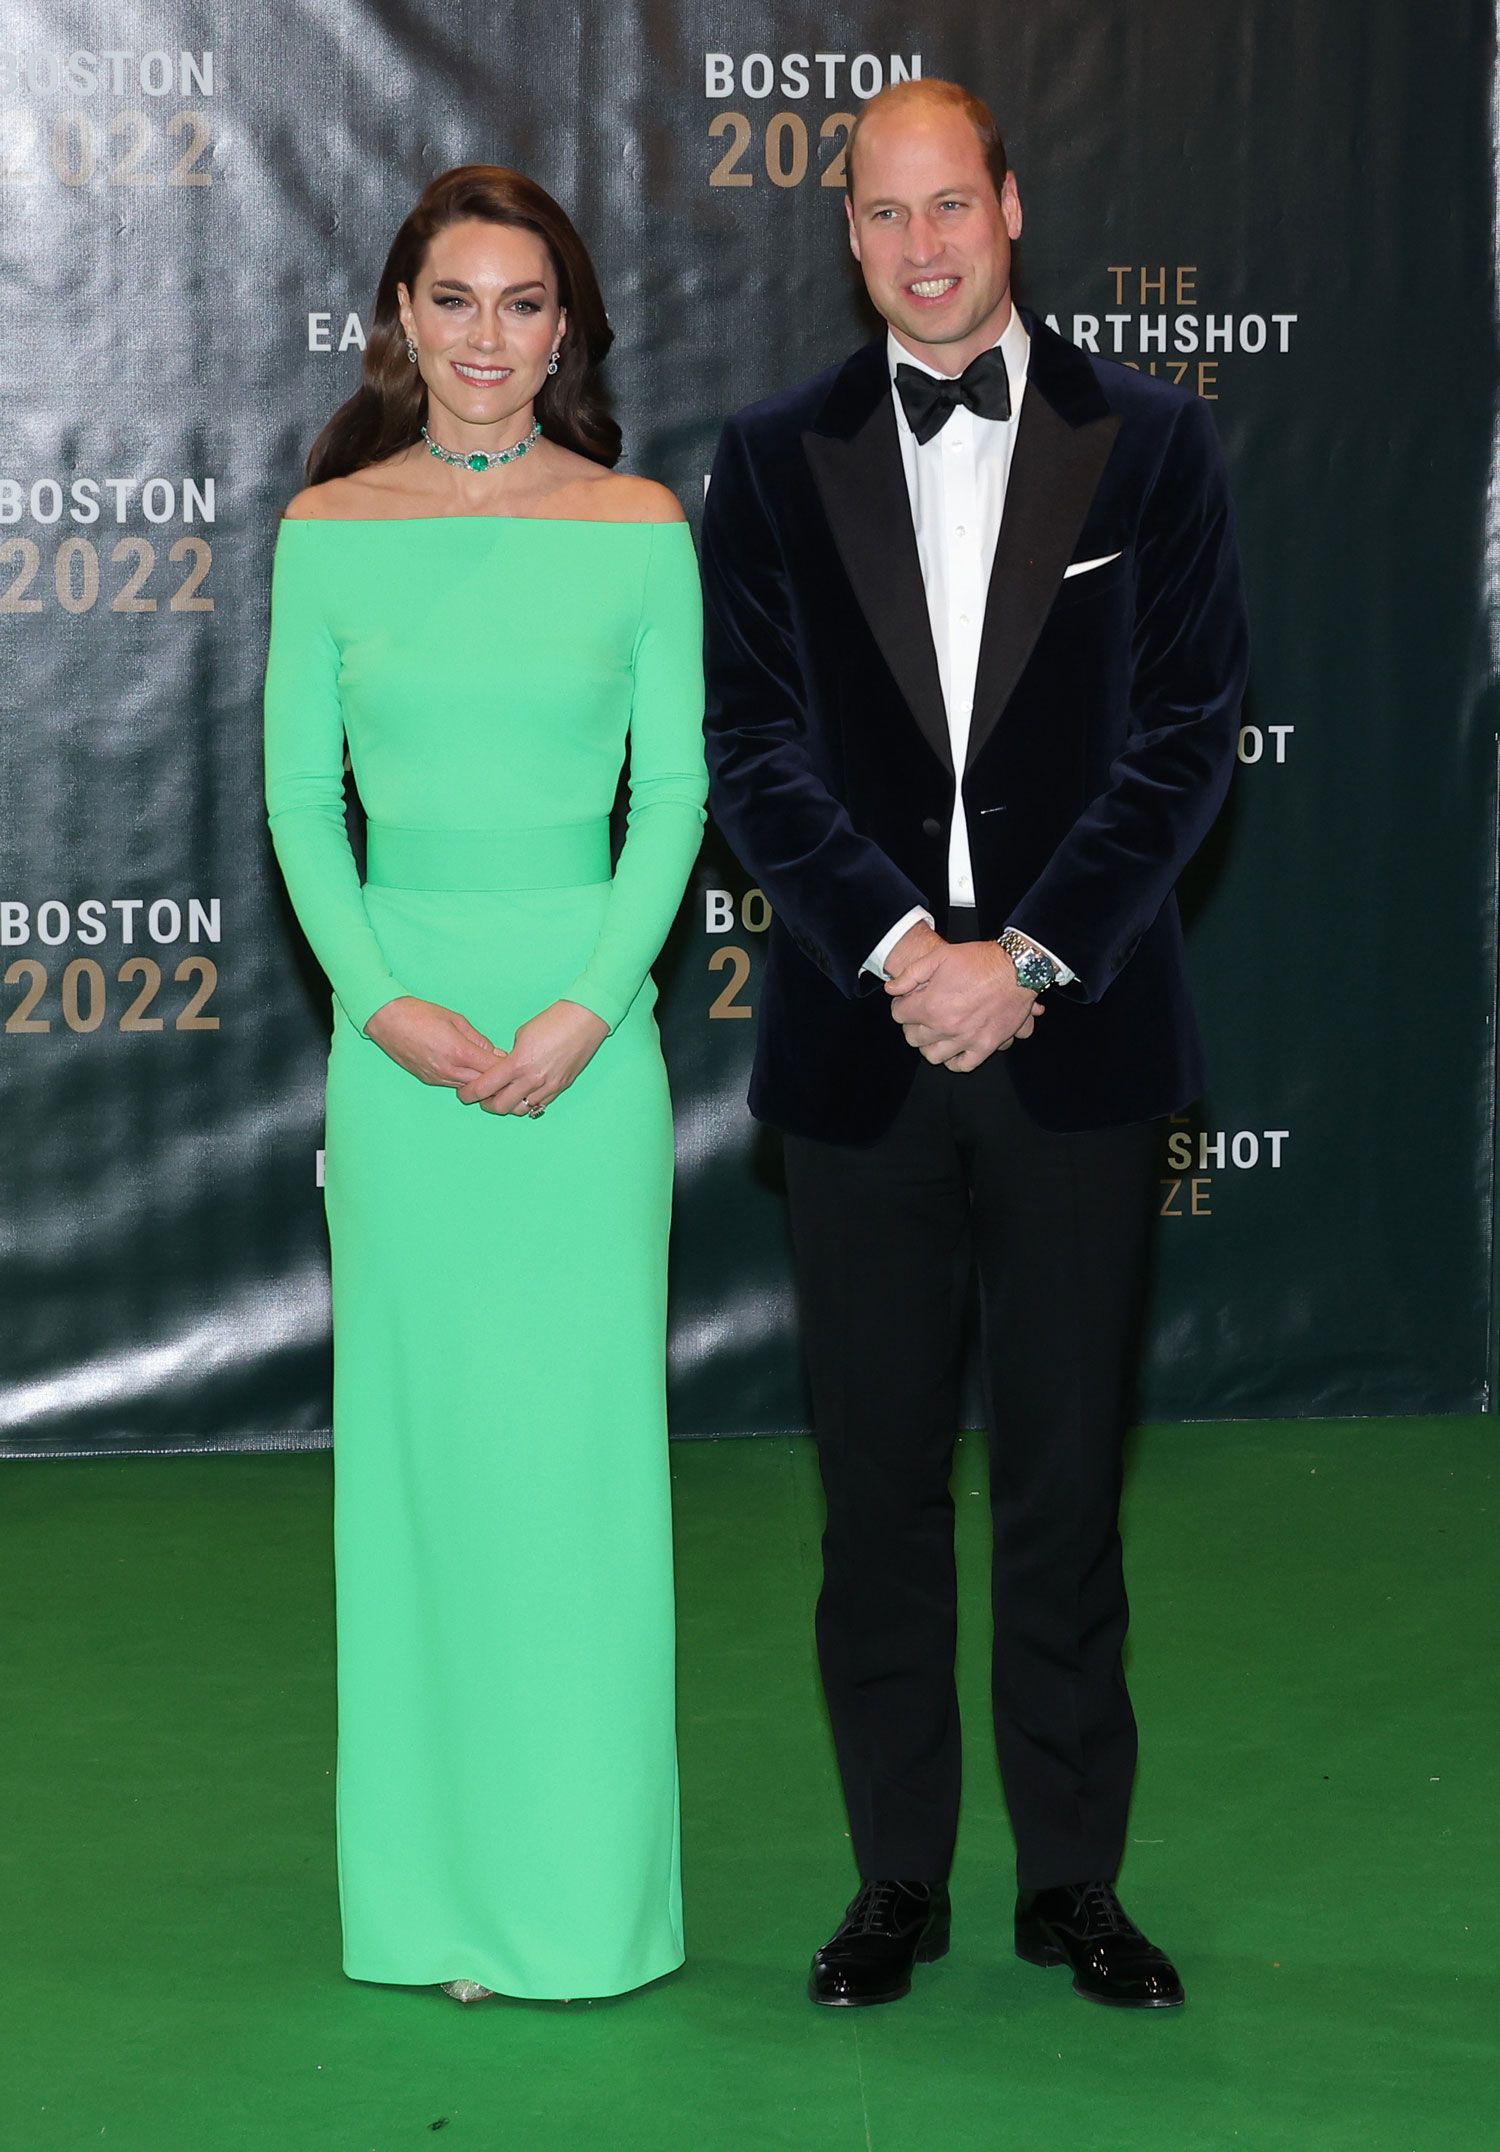 Kate Middleton Just Brought Back Queen Mary’s Emerald Necklace From the 1920s